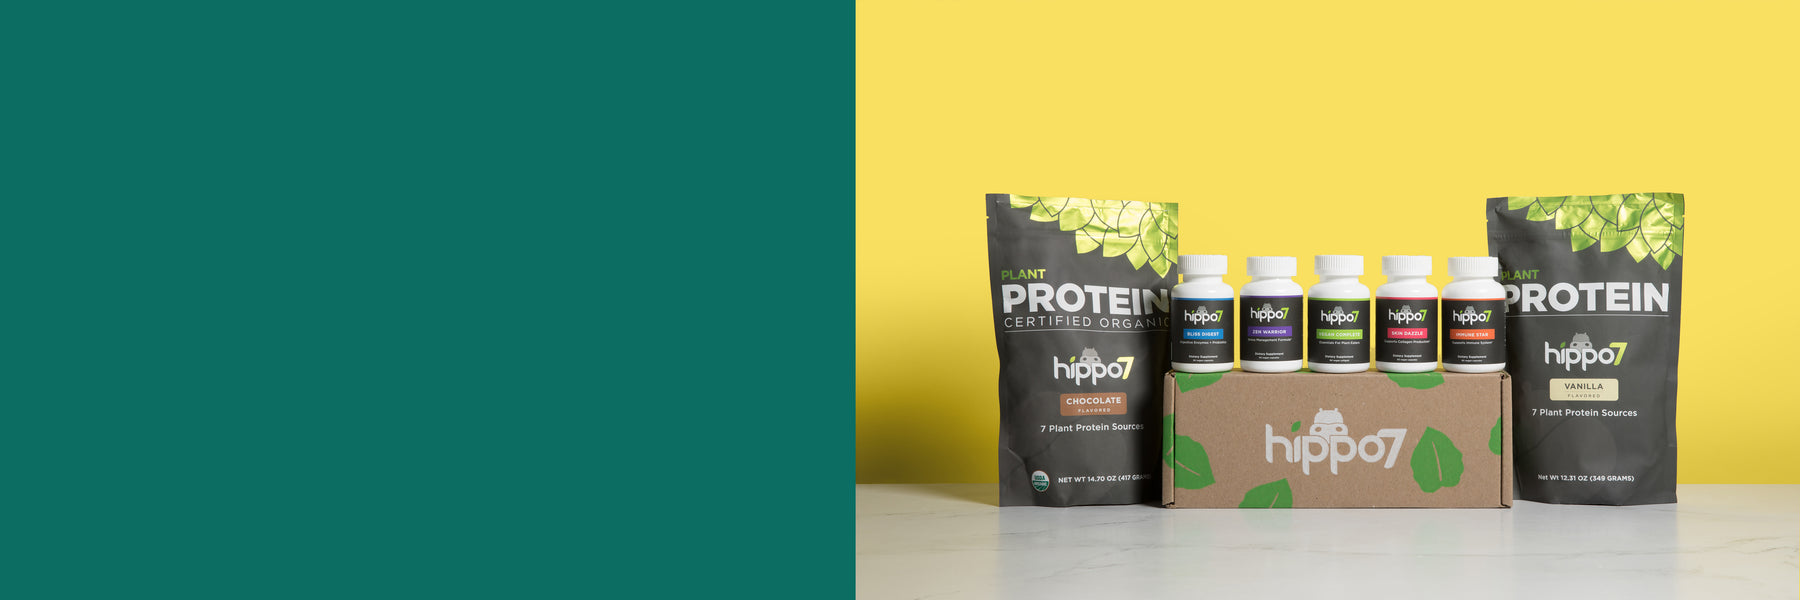 Hippo7 vegan specialty multivitamin supplements against a yellow background on a counter top shot in landscape